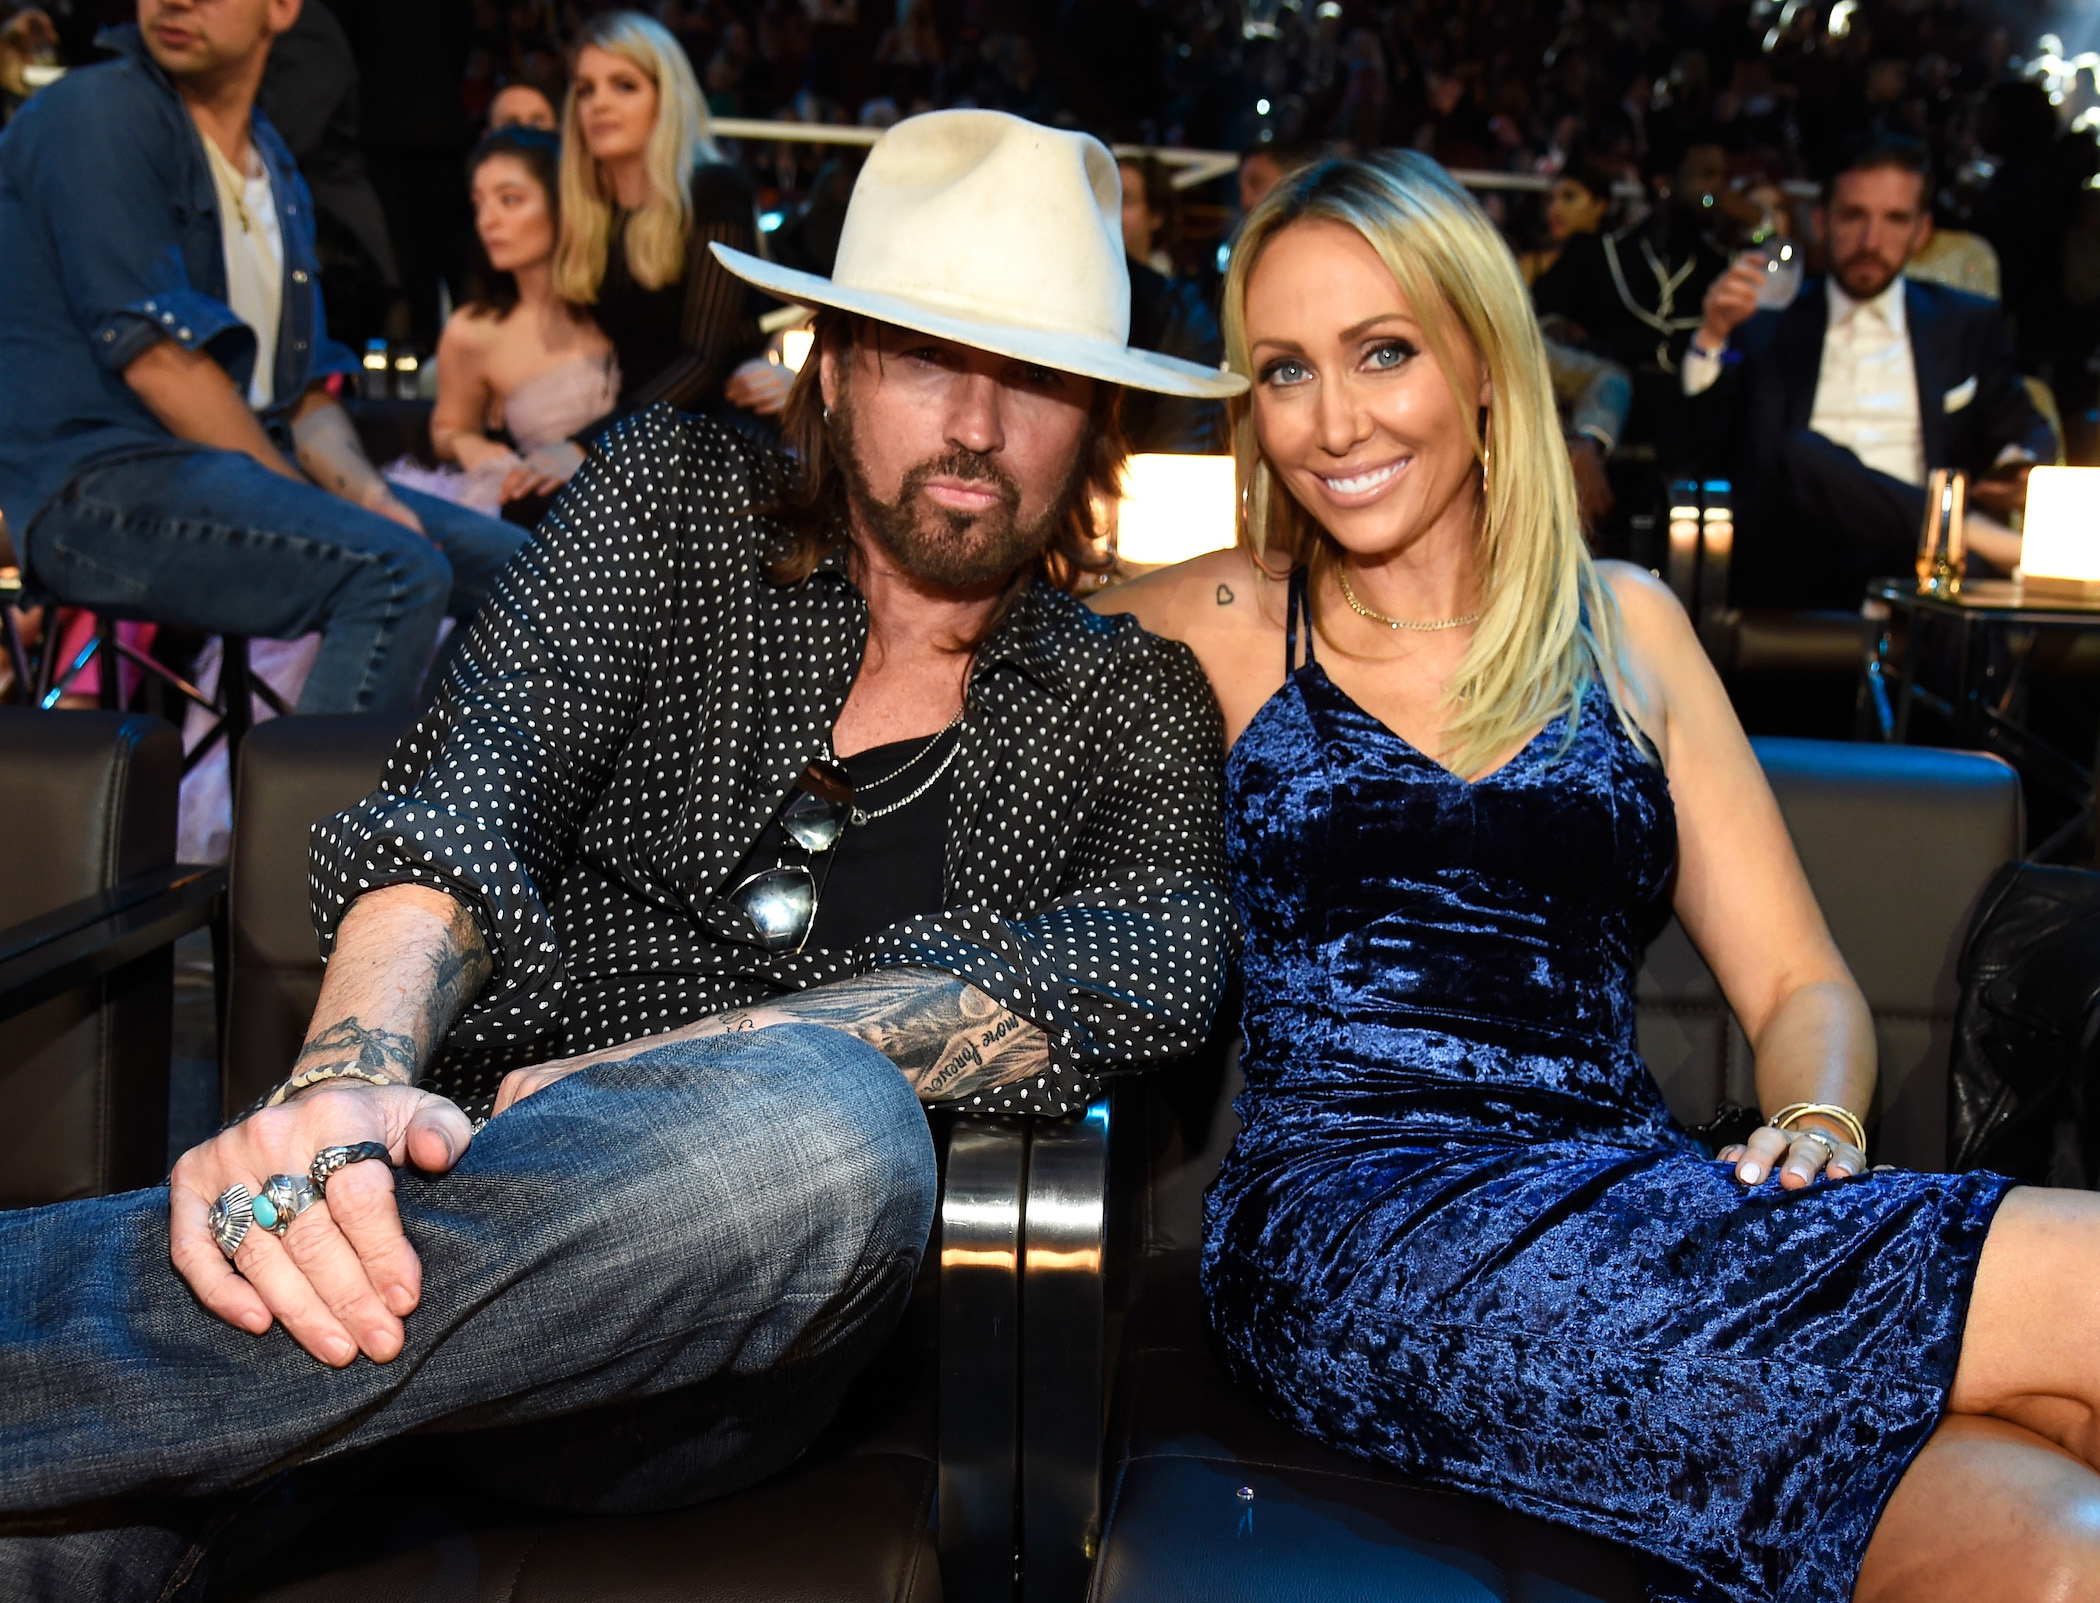 Billy Ray Cyrus and Tish Cyrus sitting together at an awards show